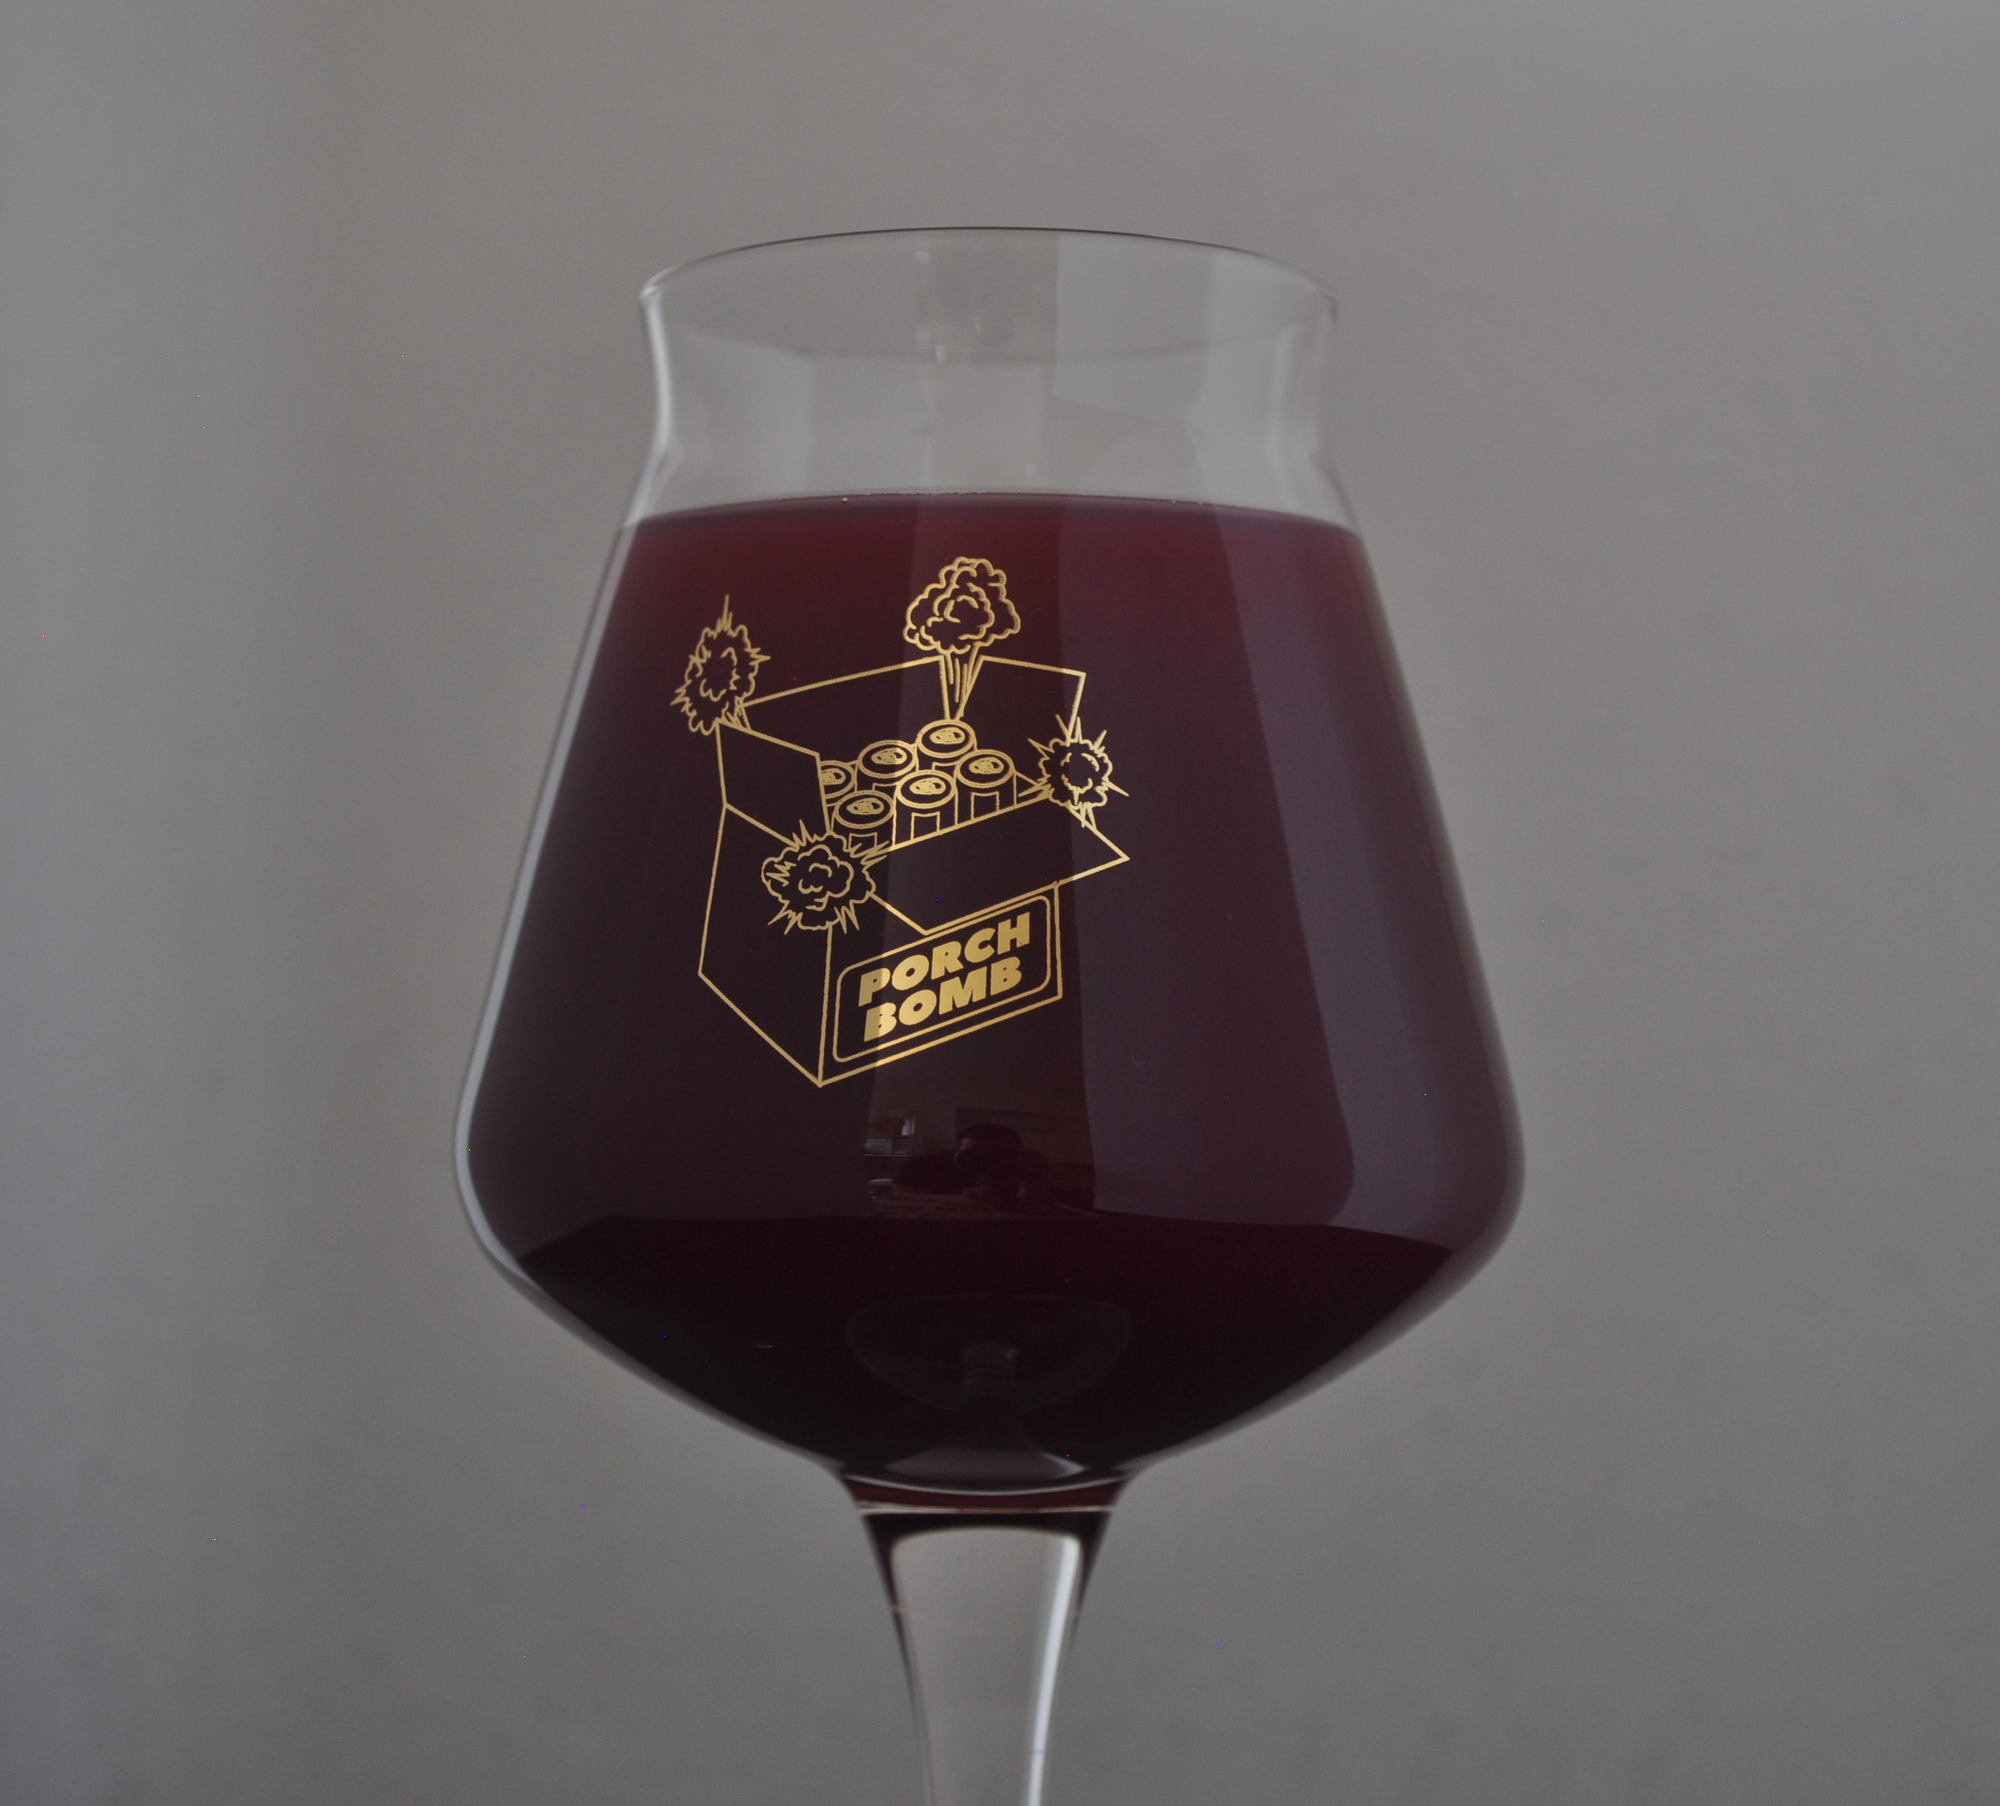 A blog centered around Waxing Poetic Mixed Berry and Sour Beer Stemware, Teku Glass, Porch Bomb Teku, Gose Glassware, Glassware For Gose, Sour Beer Glass, and Proper Beer Glassware.